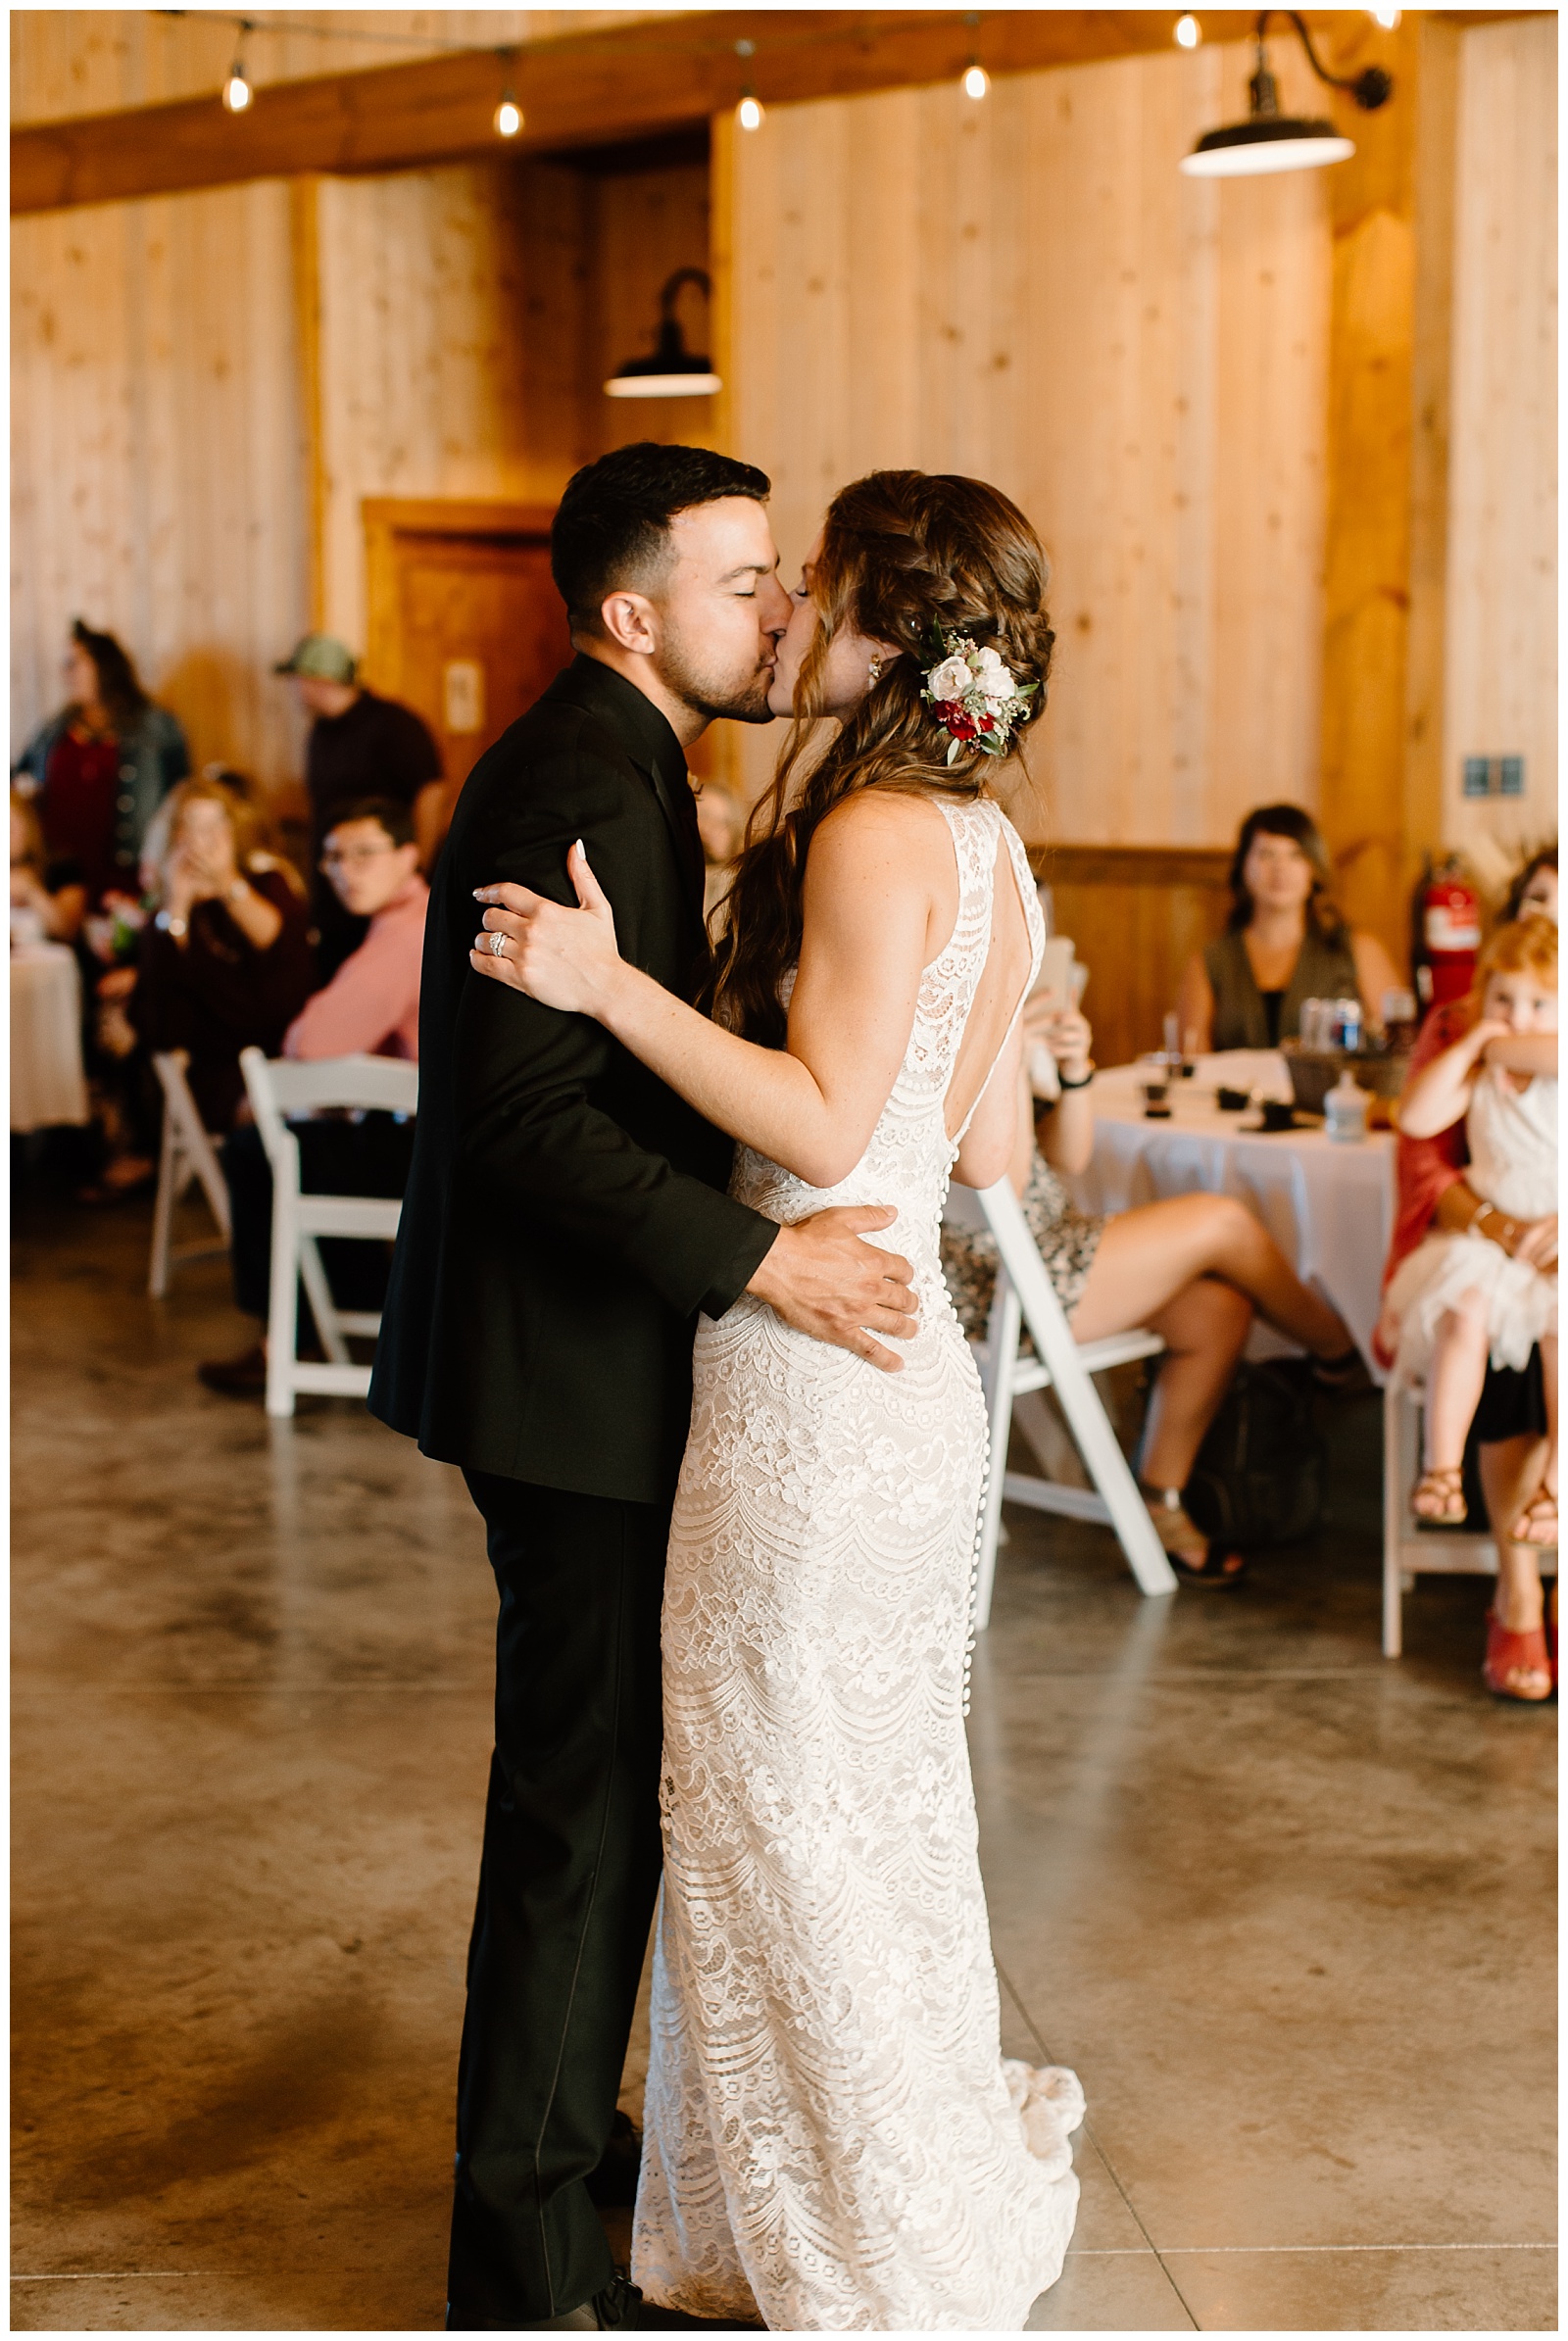 Bride and groom kiss to conclude their first dance